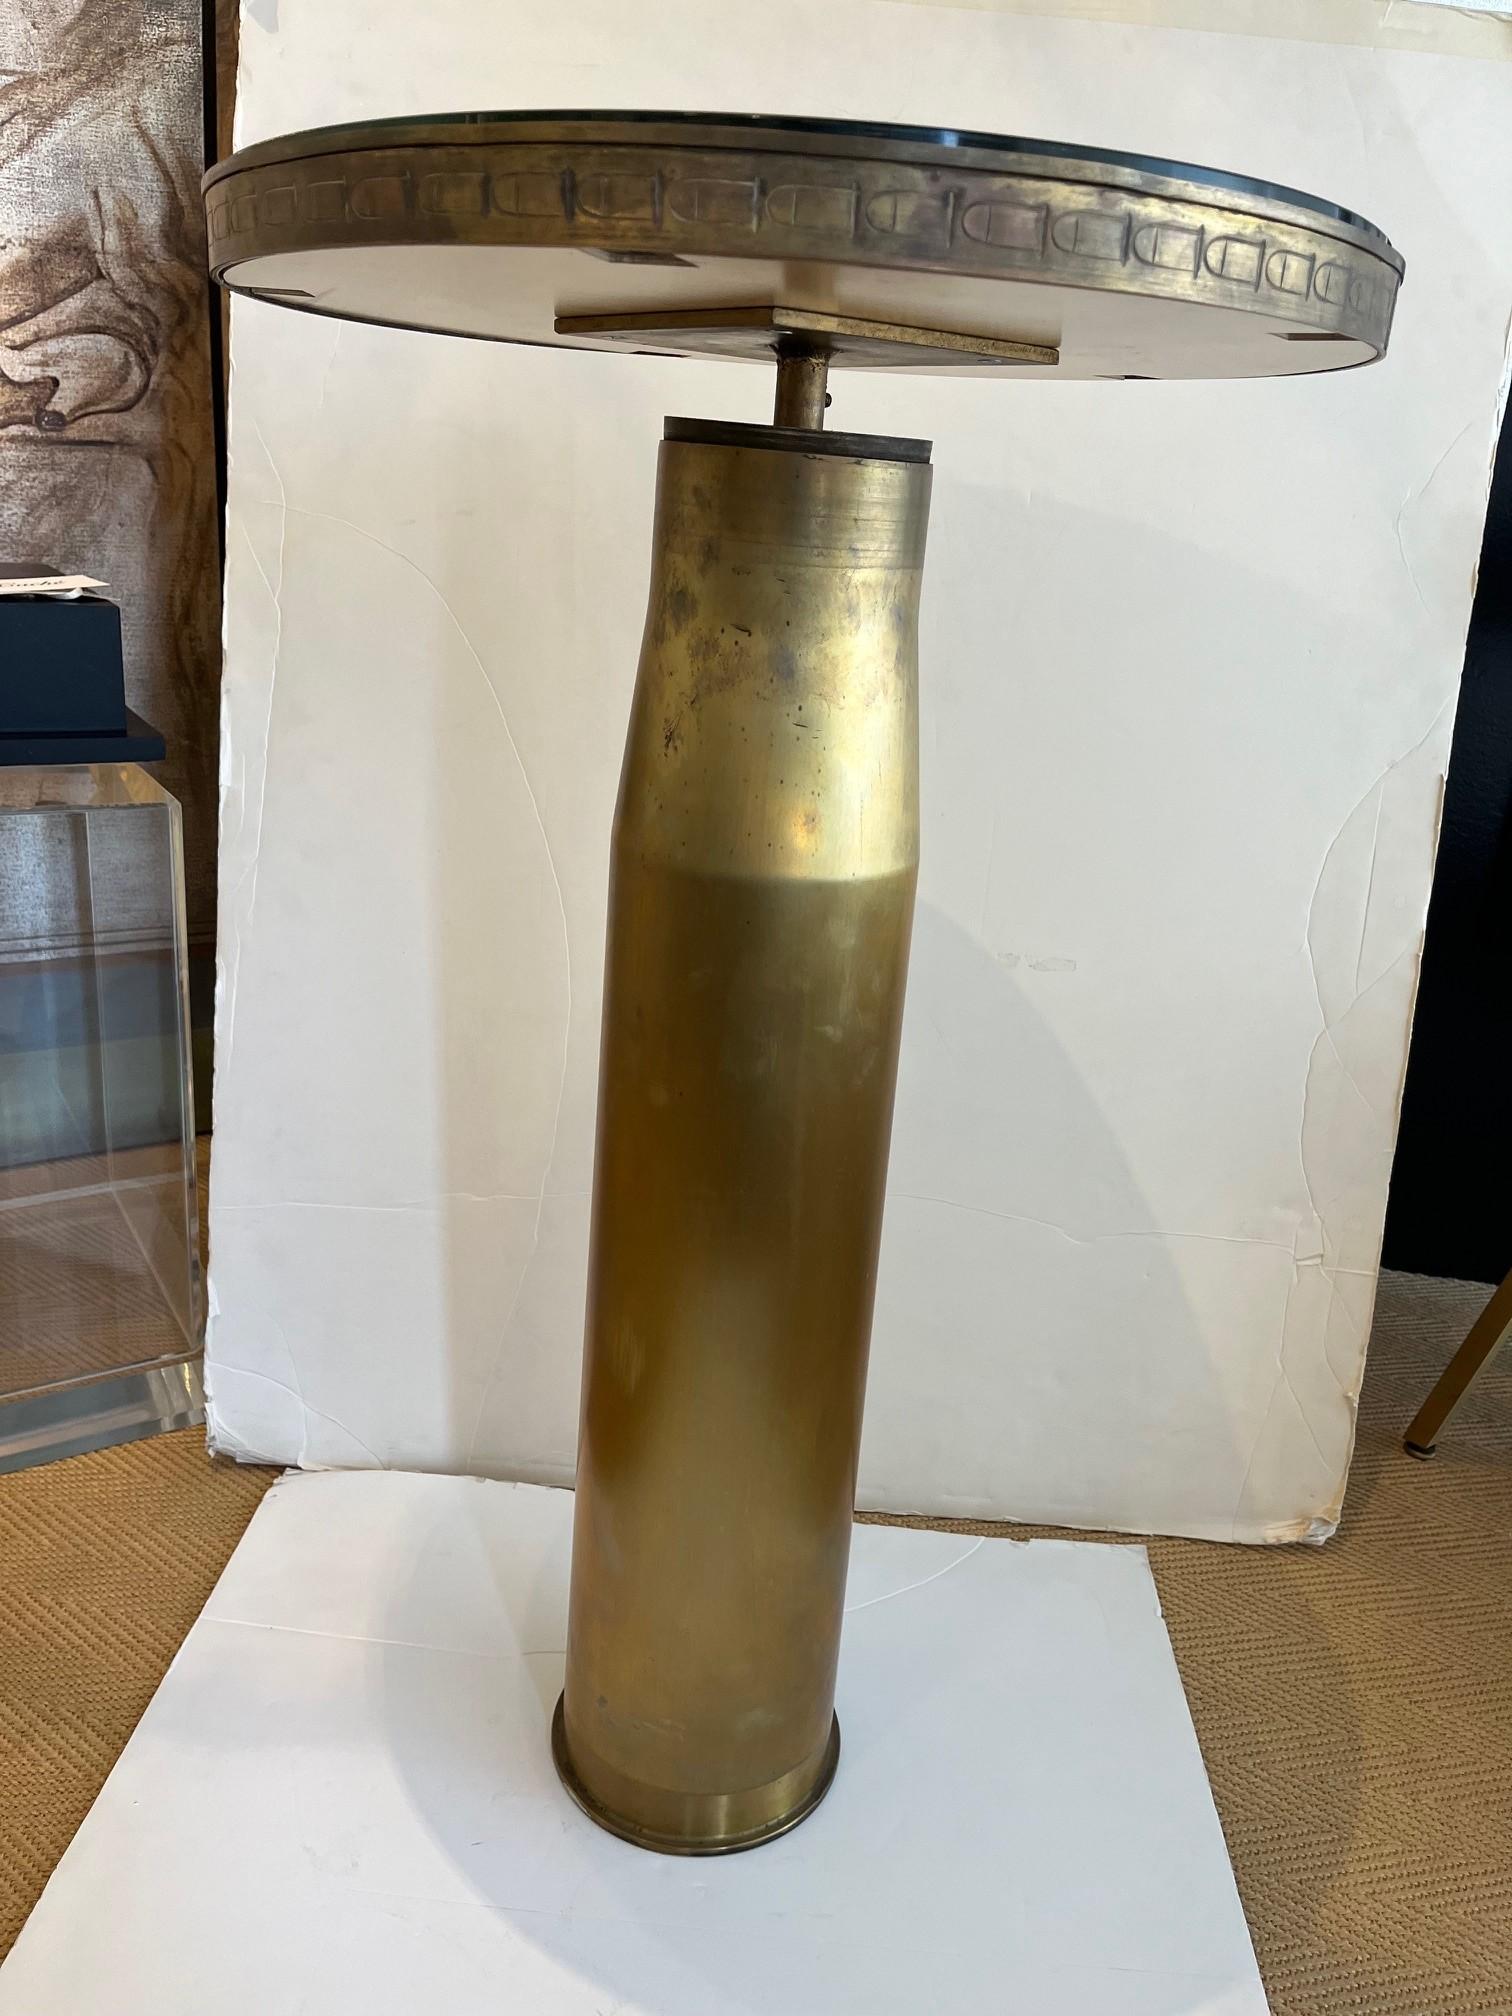 Antiqued Rare WWII Brass Shell Case with Tapering Form Side Table, Antiqued Gold Mirrored Top Spins and maybe Locked in Place
